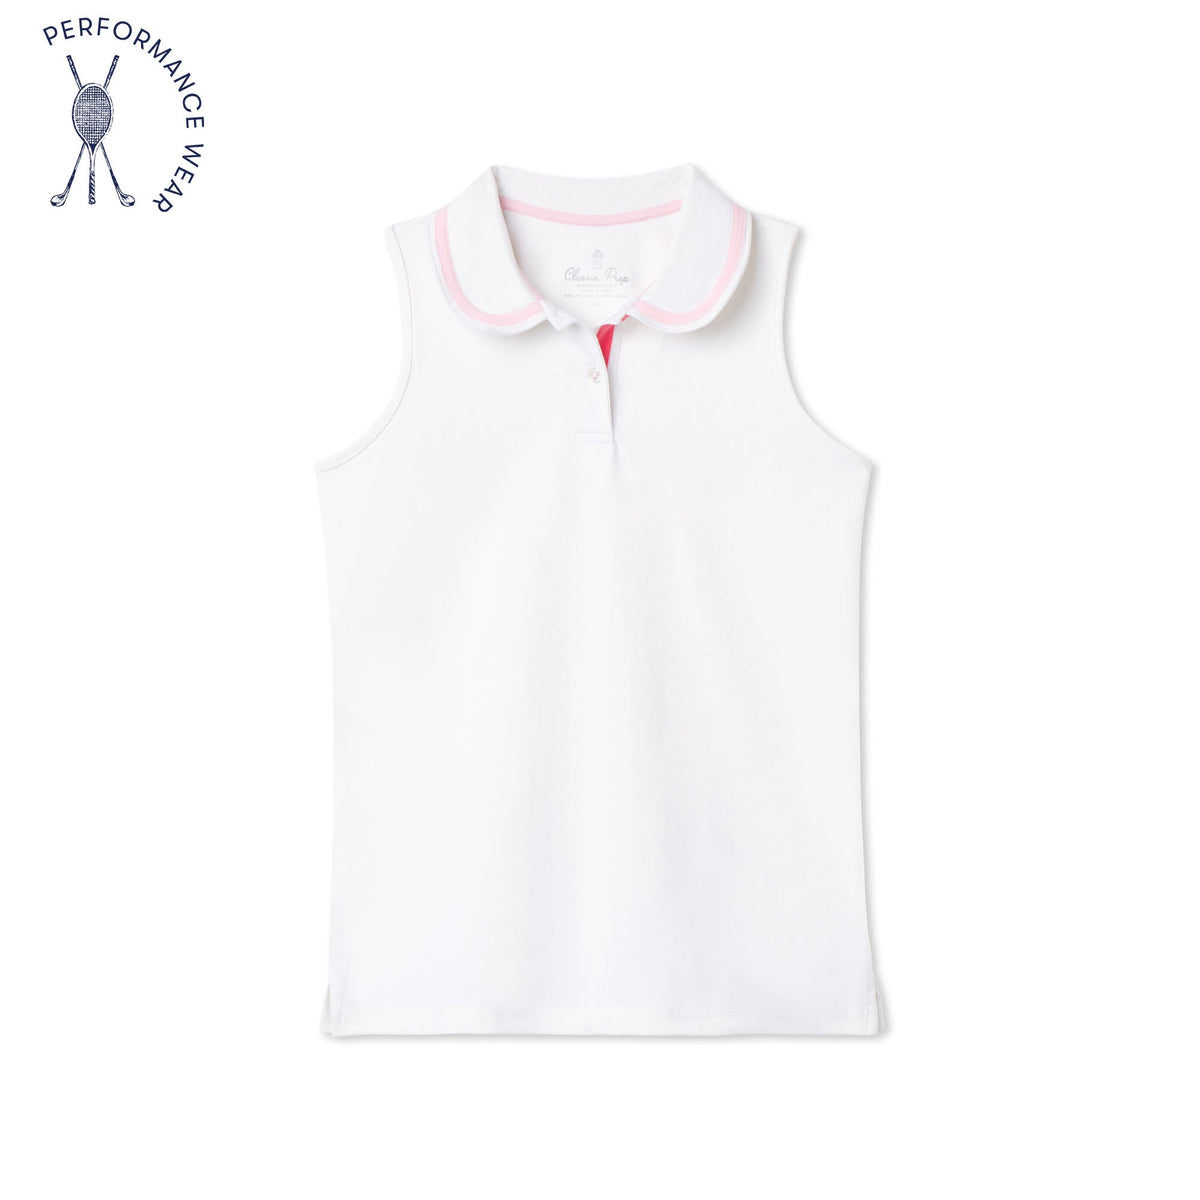 Classic and Preppy Adair Tennis Performance Sherbet Sleeveless Polo, Bright White-Shirts and Tops-Bright White-2T-CPC - Classic Prep Childrenswear